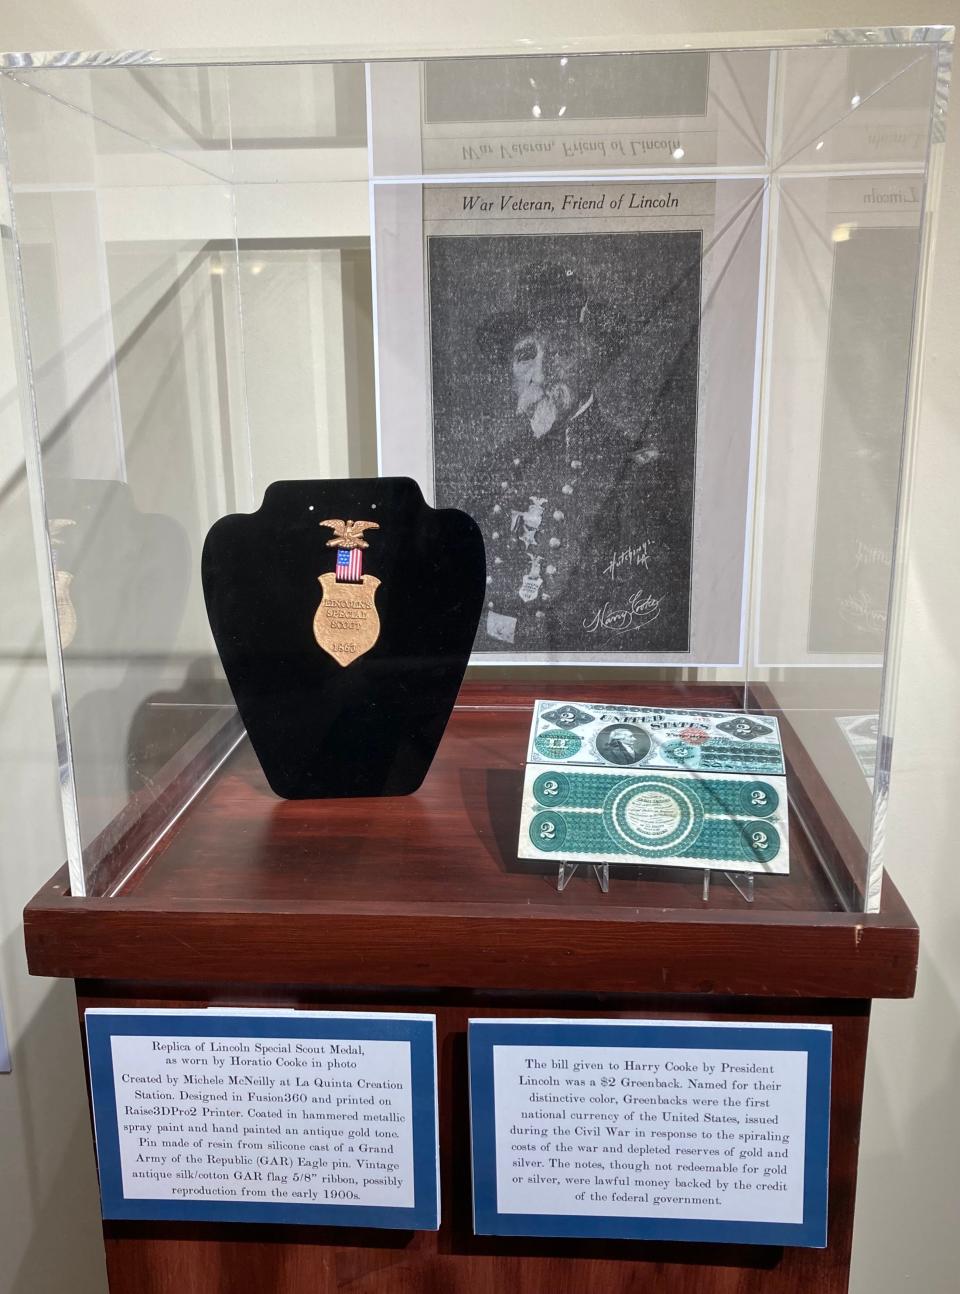 The museum recreated the Lincoln's Special Scout metal that Horacio Cooke wore.